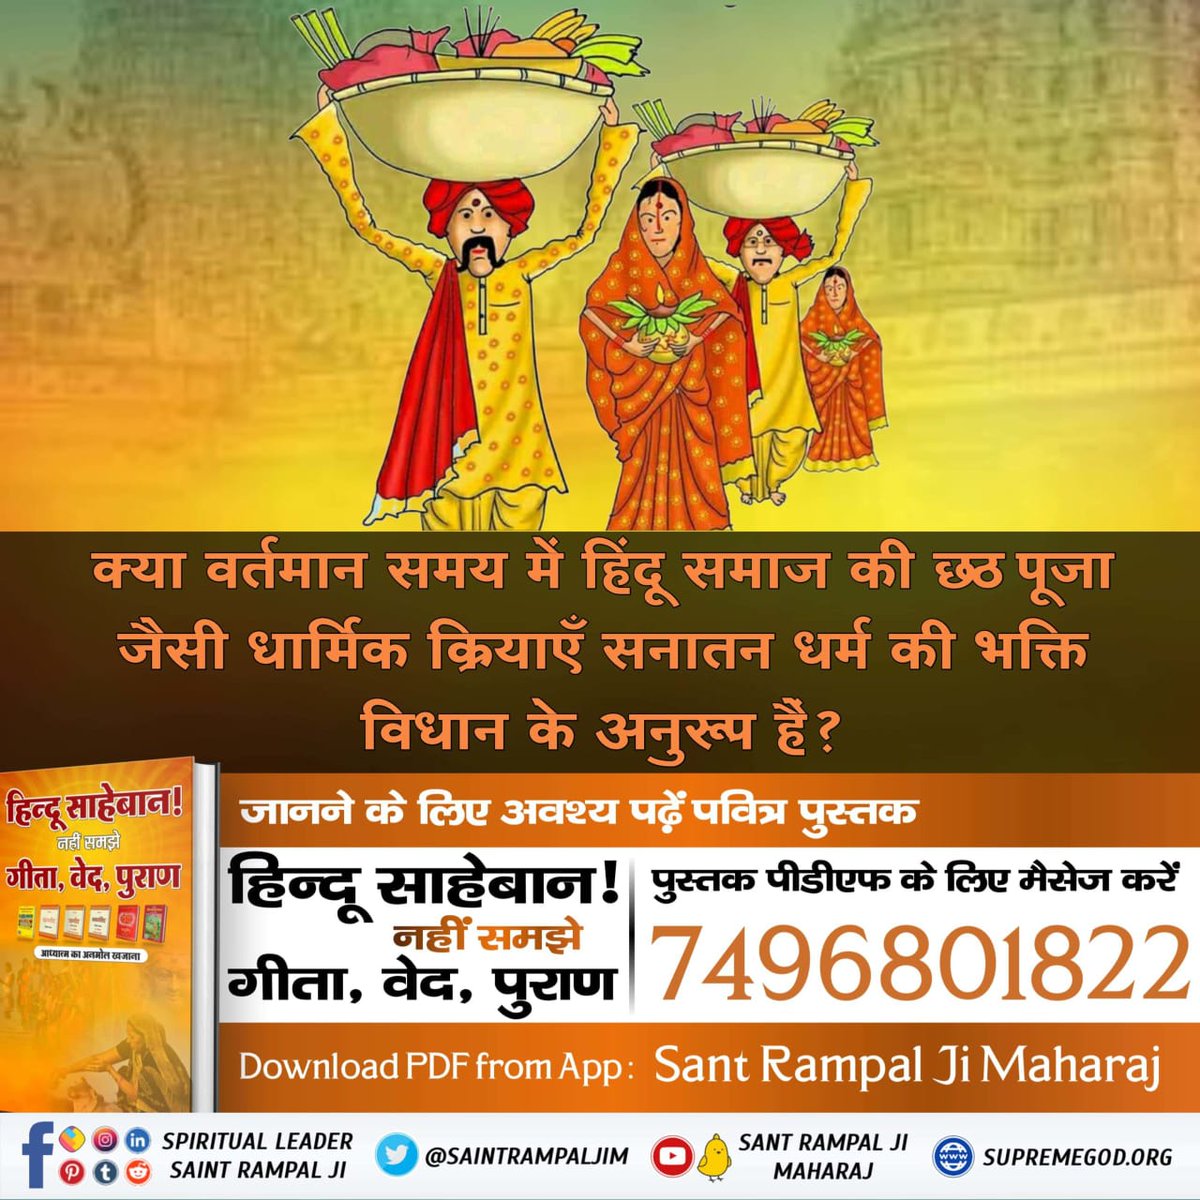 #GodNightFriday
Are the present-day religious activities like Chhath Puja in Hindu society in accordance with the devotional practices of Sanatan Dharma❓
👉Learn amazing secrets in the holy book 'Hindu Sahebaan ! Nahin Samajhe Geeta, Ved, Puraan'